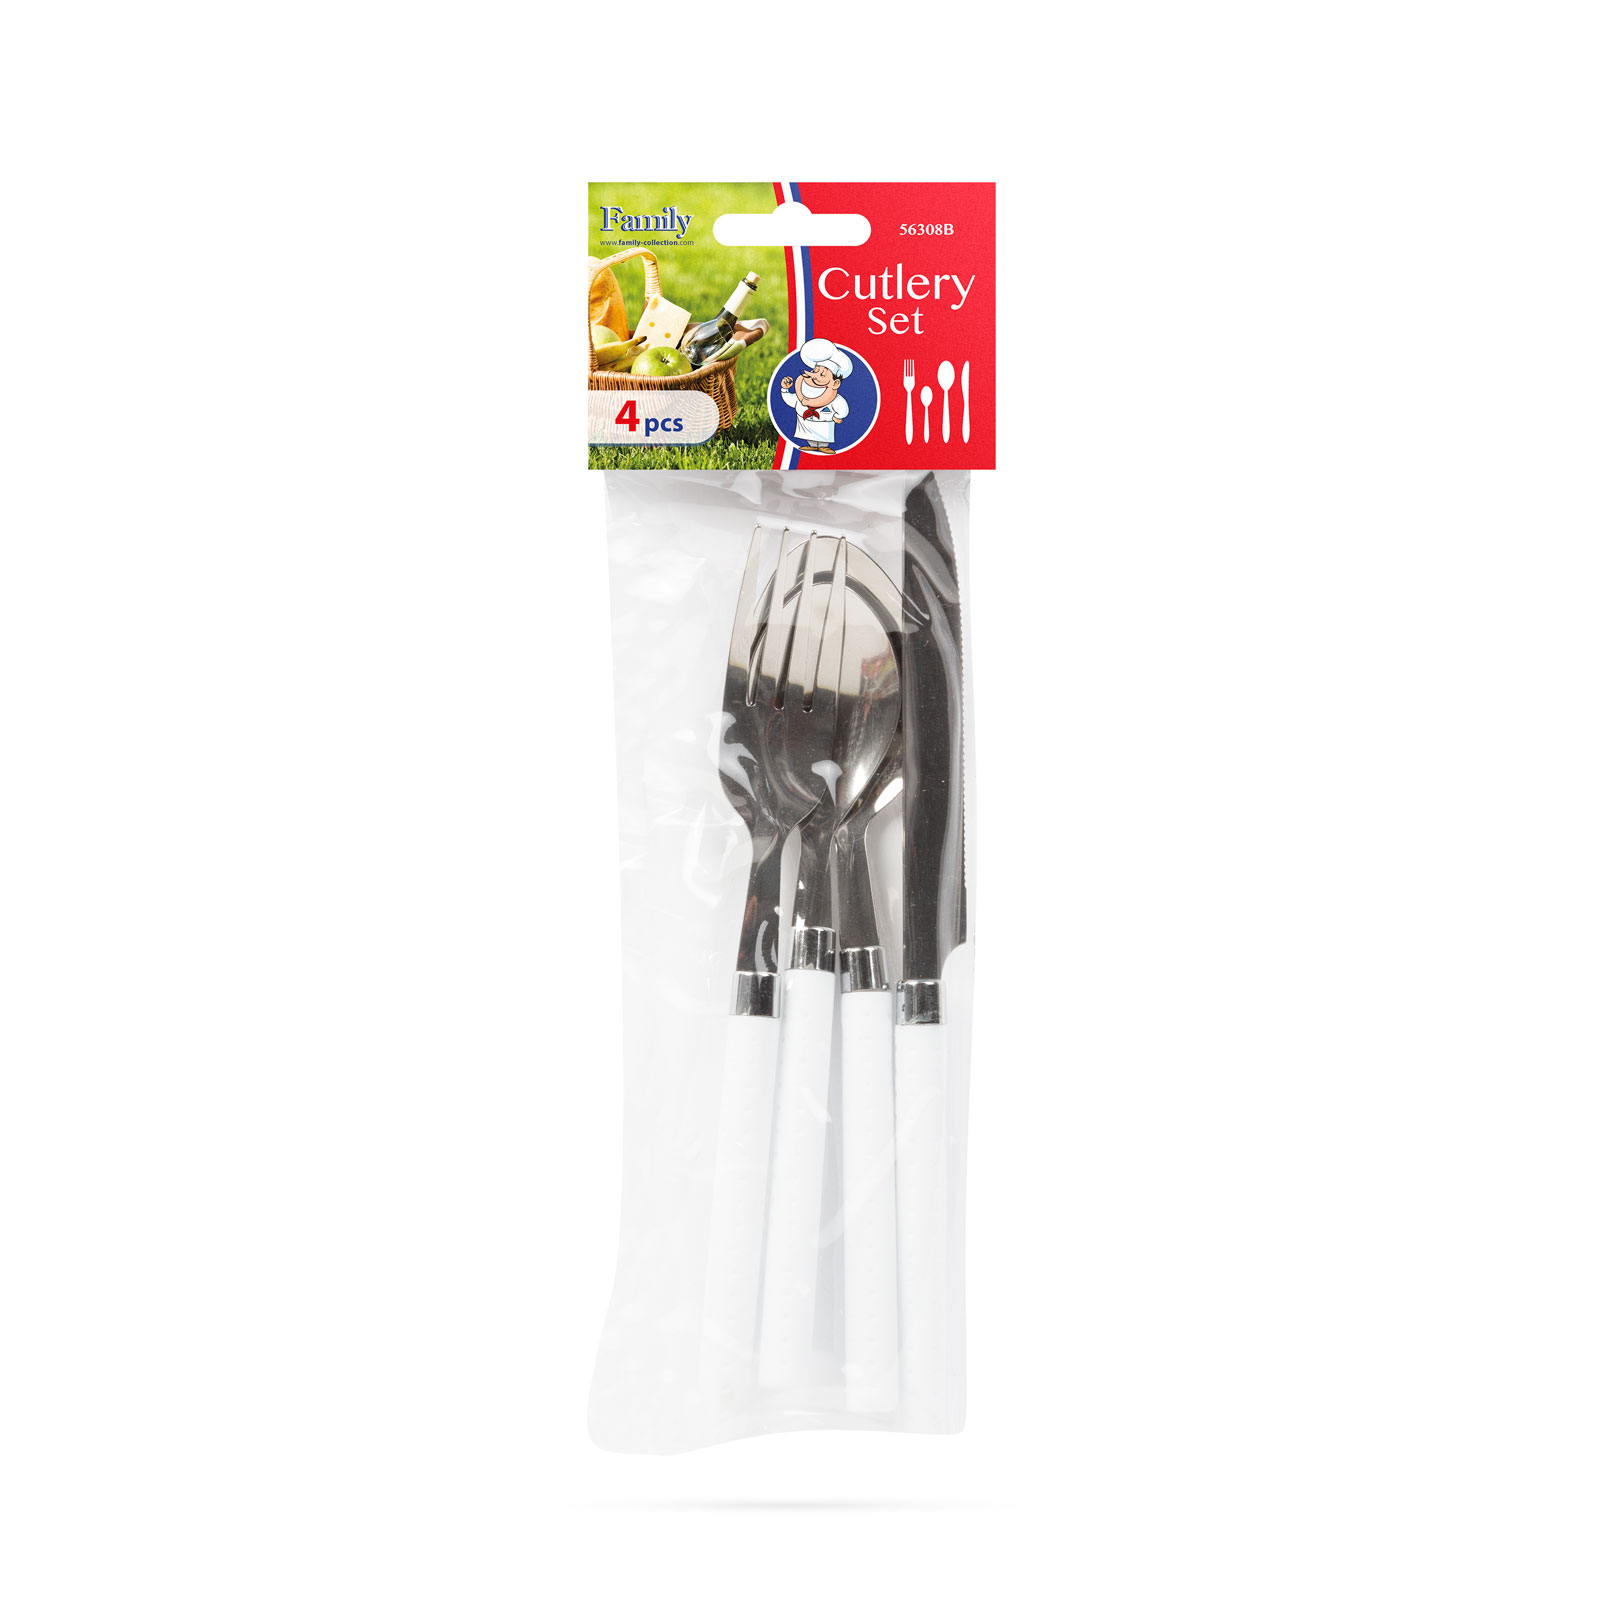 Cutlery set - white - 4 pcs- with plastic handle thumb